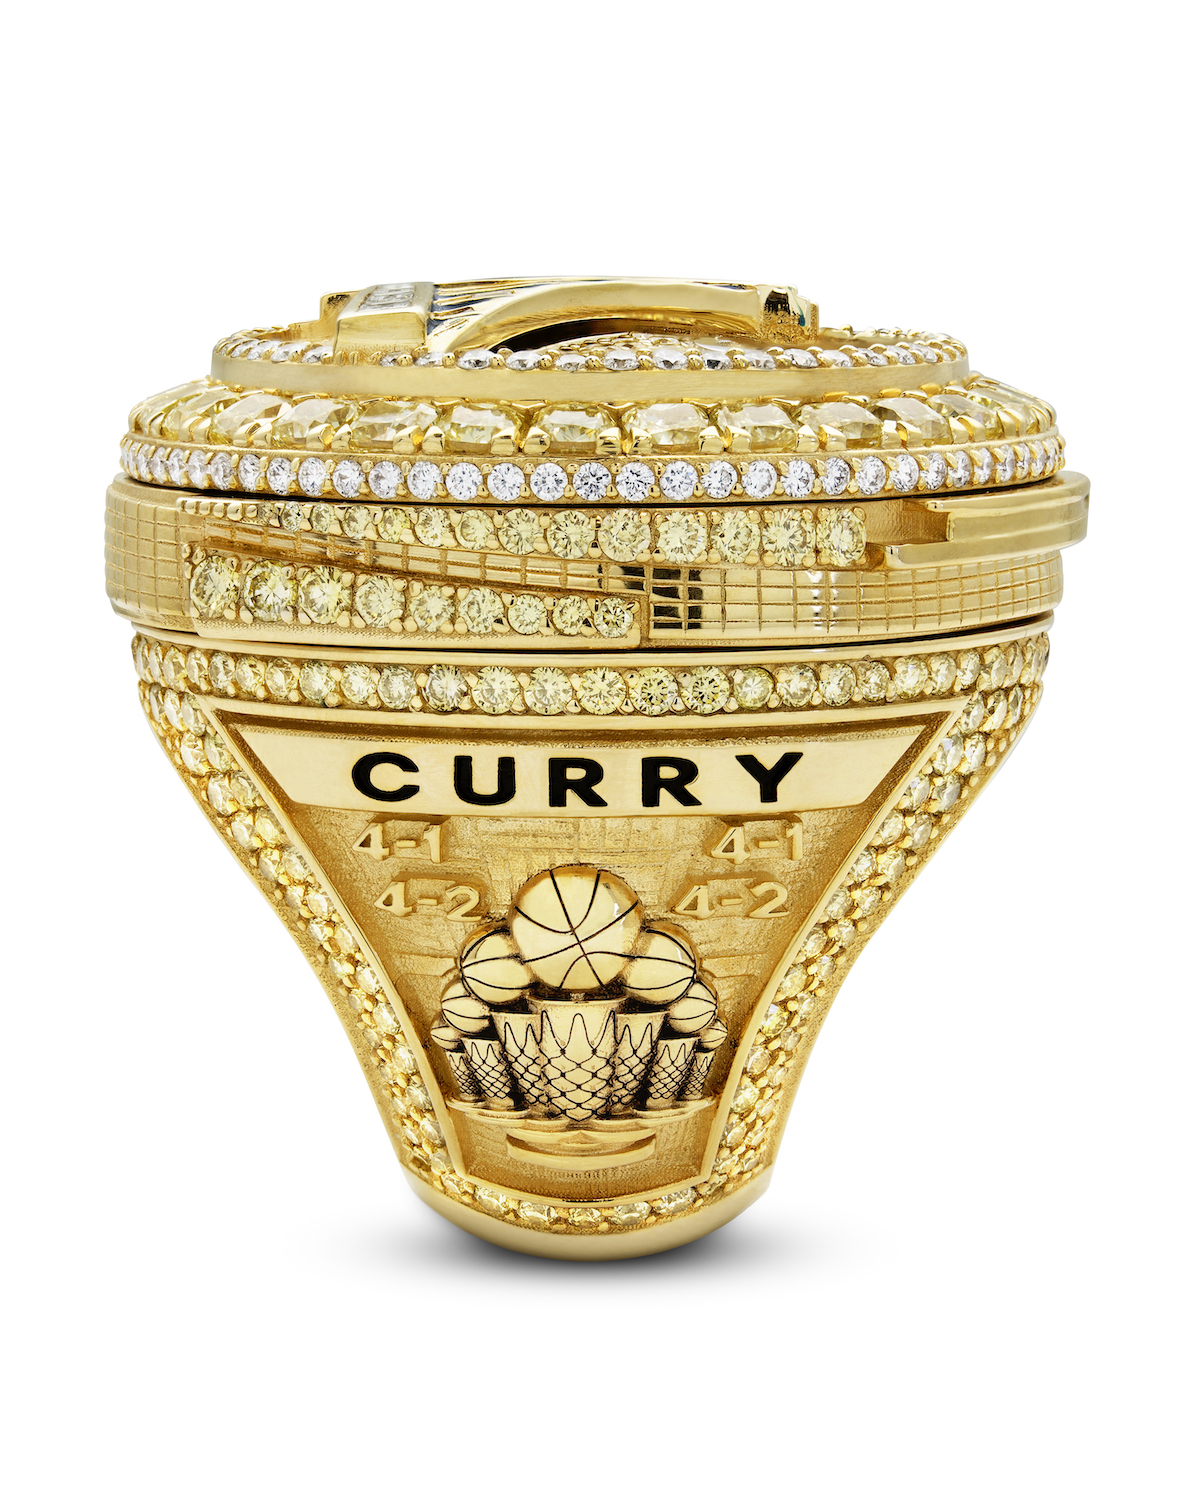 2017 NBA Championship Ring Designed By Jason of Beverly Hills